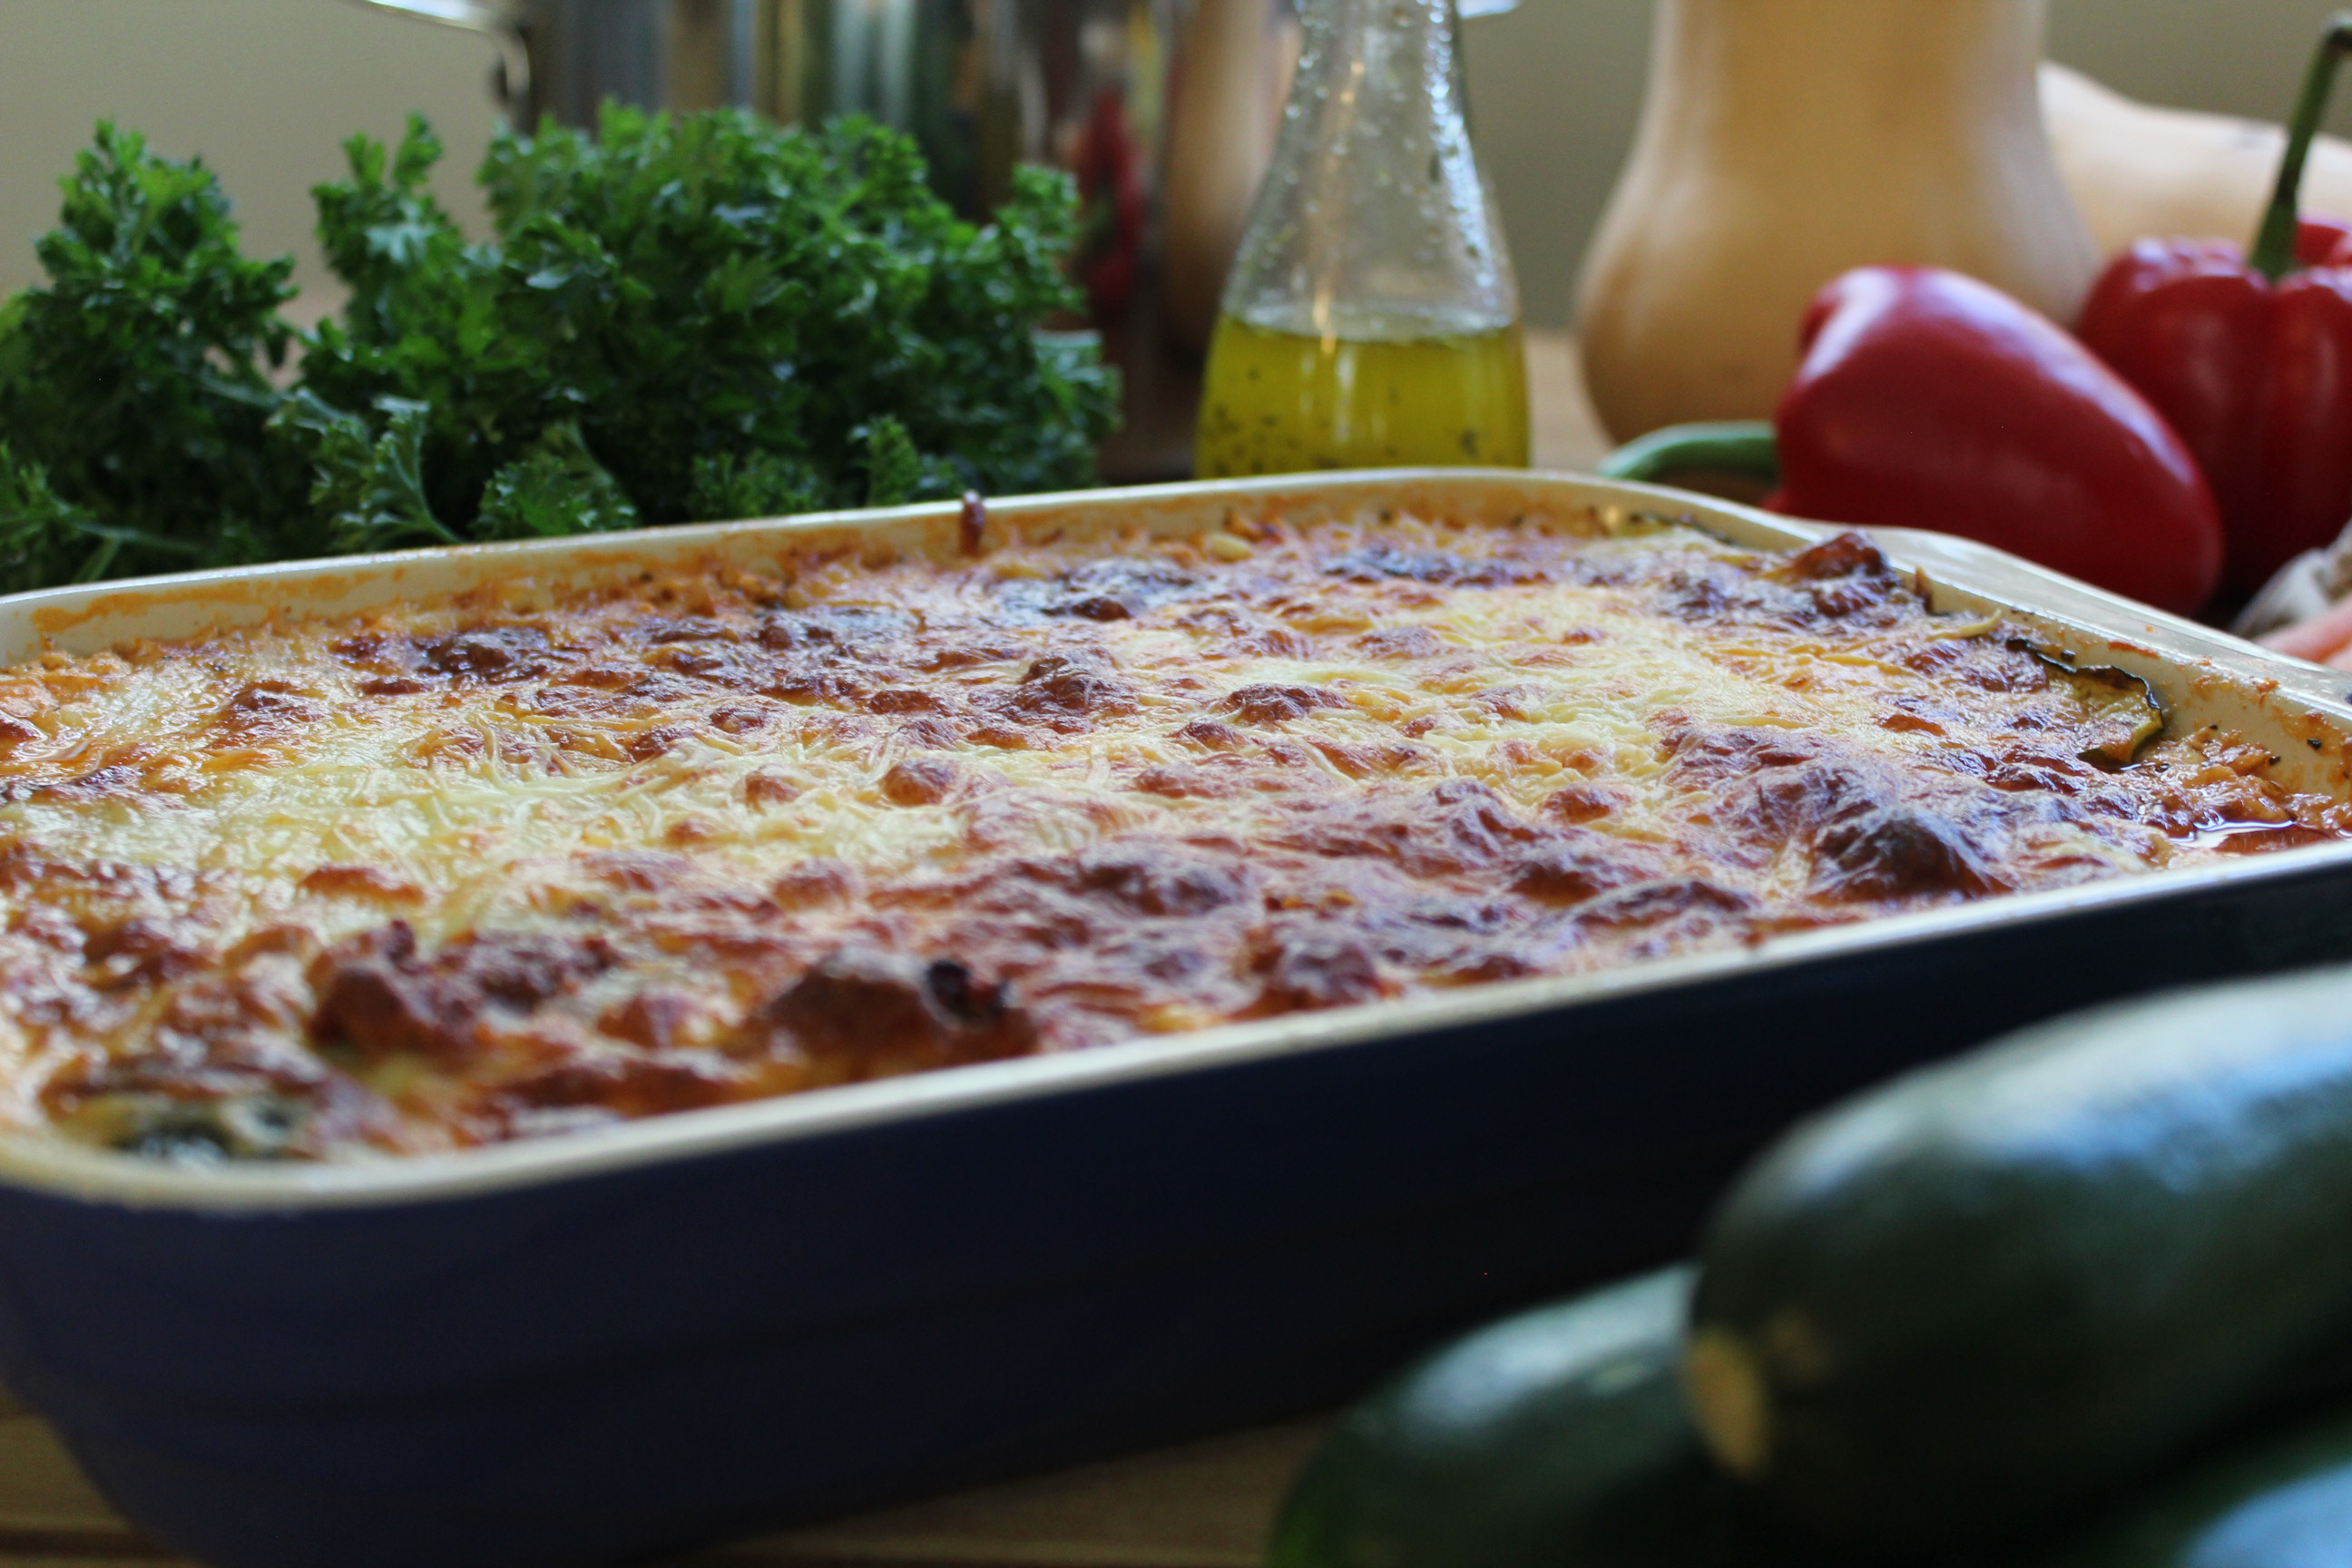 Delicious Zucchini Lasagna (Great Grain-Free Freezer Meal) - Health, Home, & Happiness